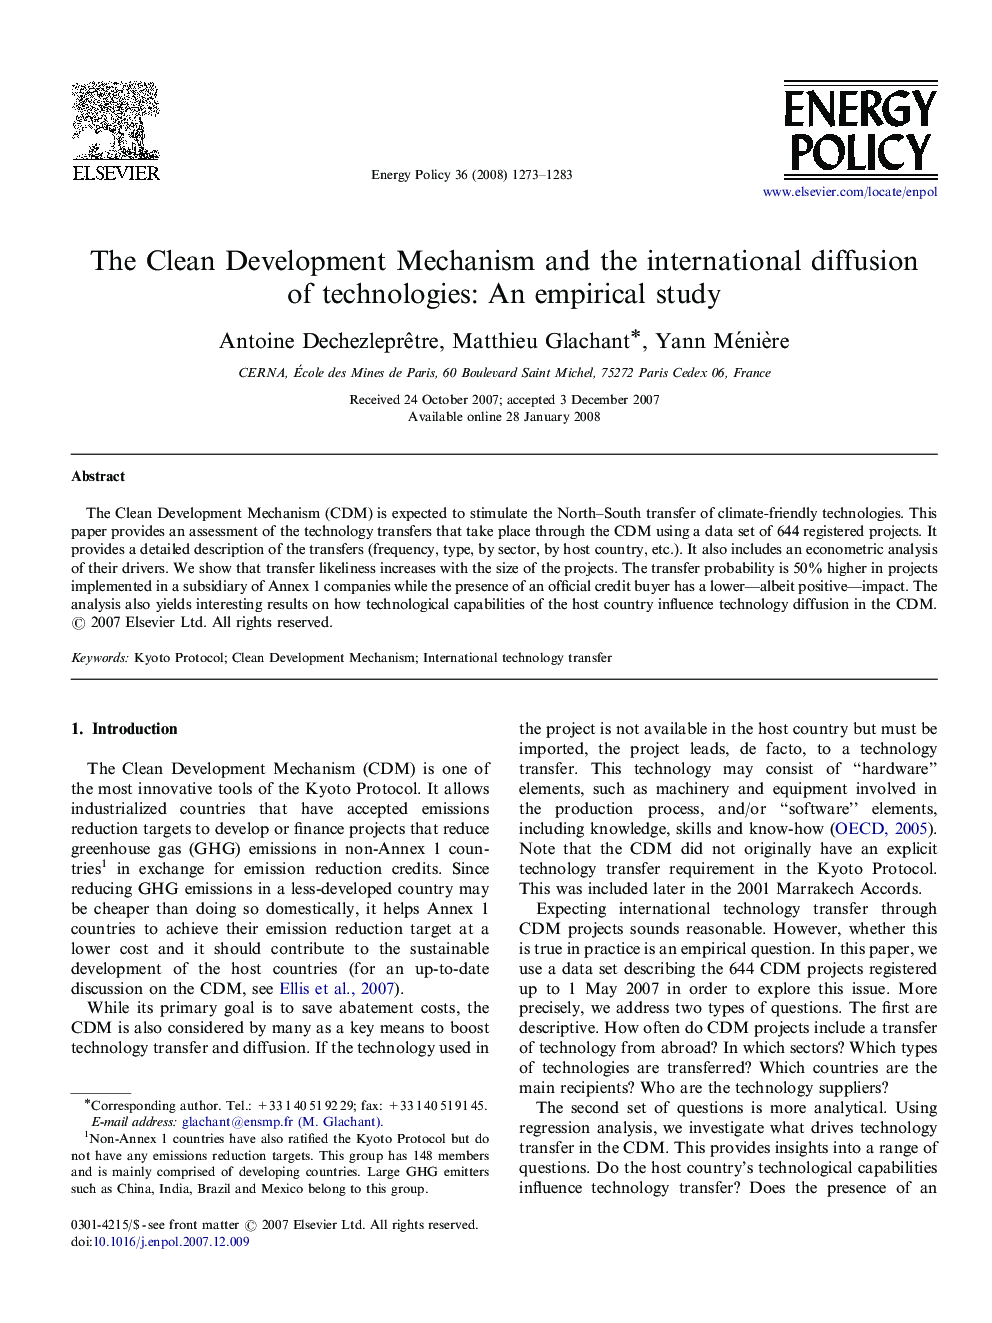 The Clean Development Mechanism and the international diffusion of technologies: An empirical study